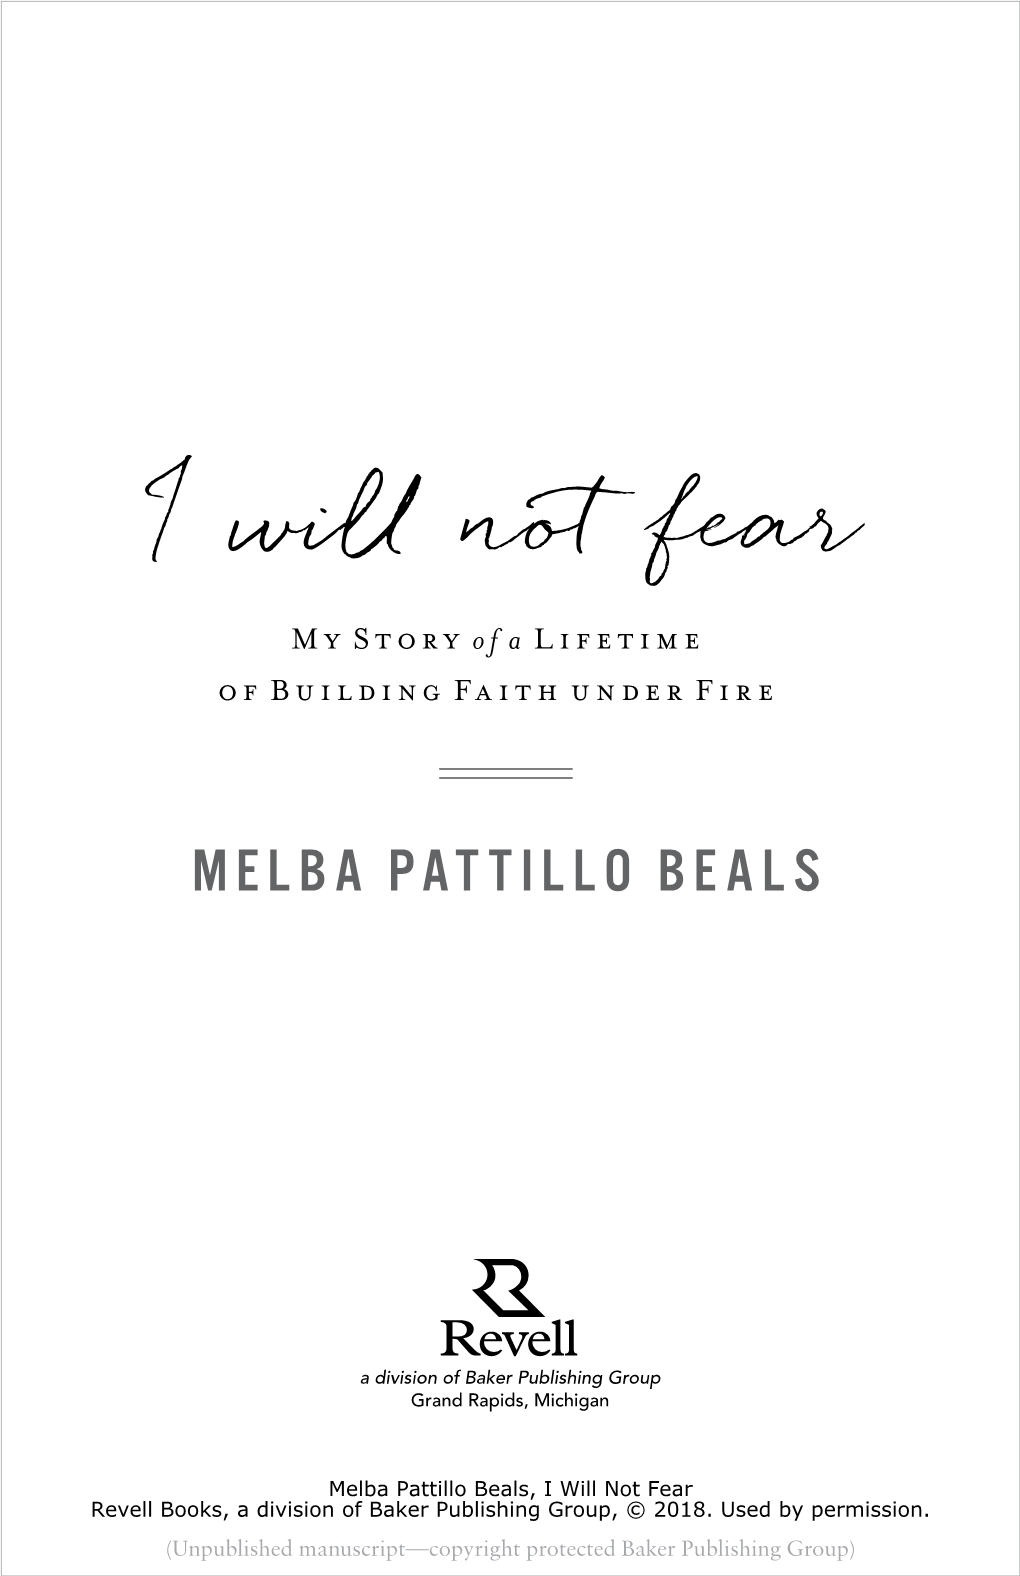 I Will Not Fear My Story of a Lifetime of Building Faith Under Fire